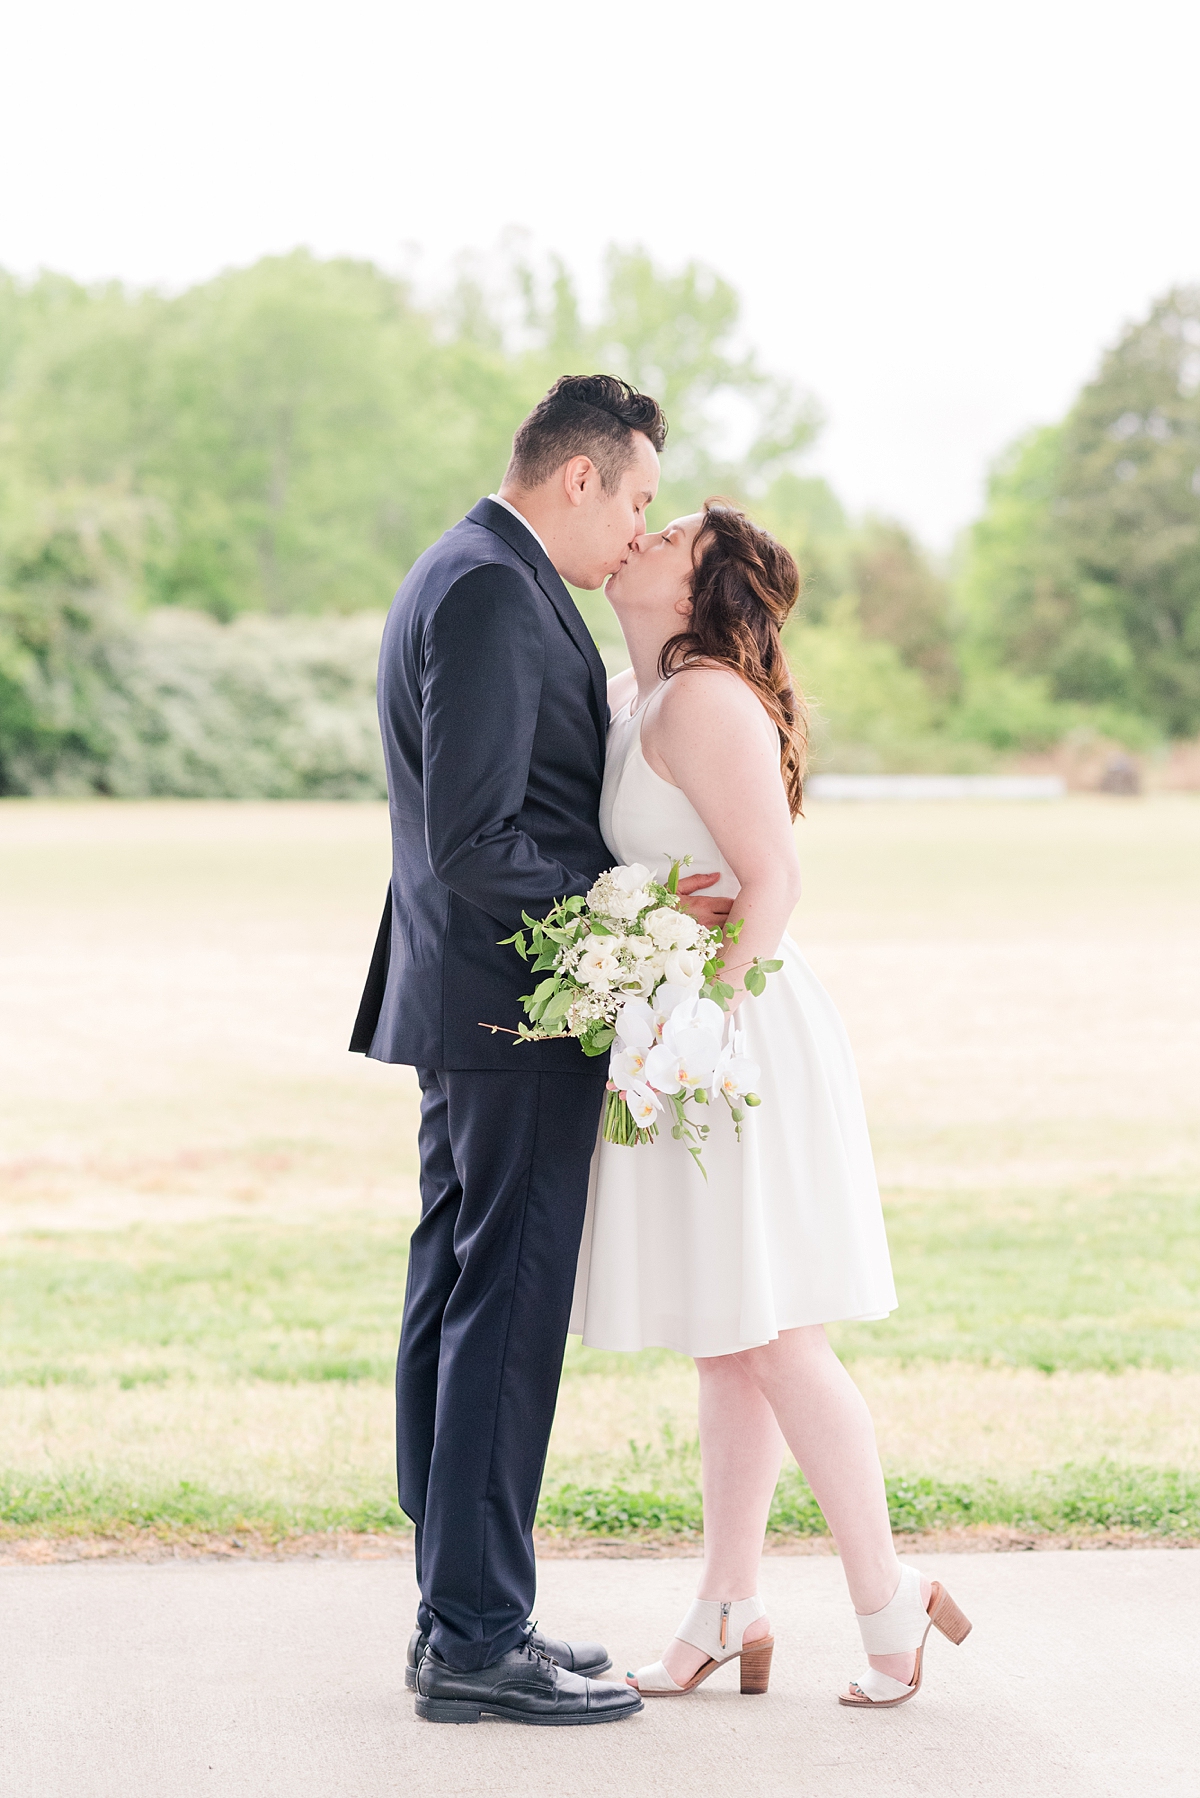 Small Wedding Ceremony at Hanover Courthouse Park by Richmond Wedding Photographer Kailey Brianne Photography. 